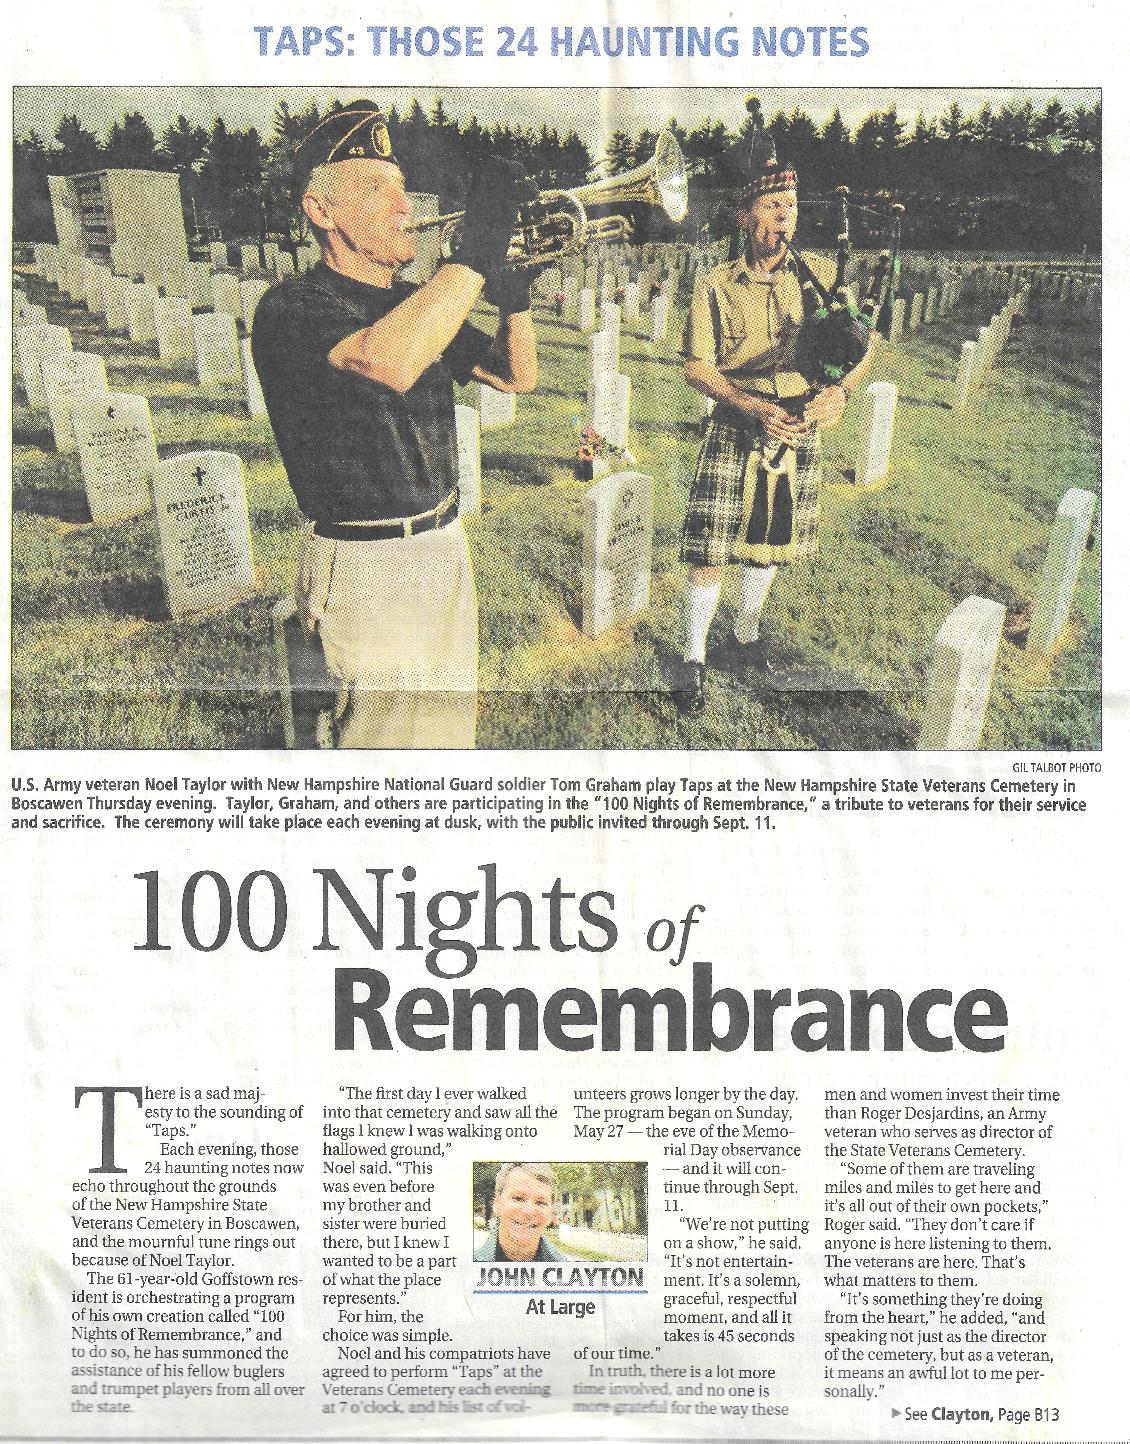 100 Nights of Remembrance - New Hampshire State Veterans Cemetery